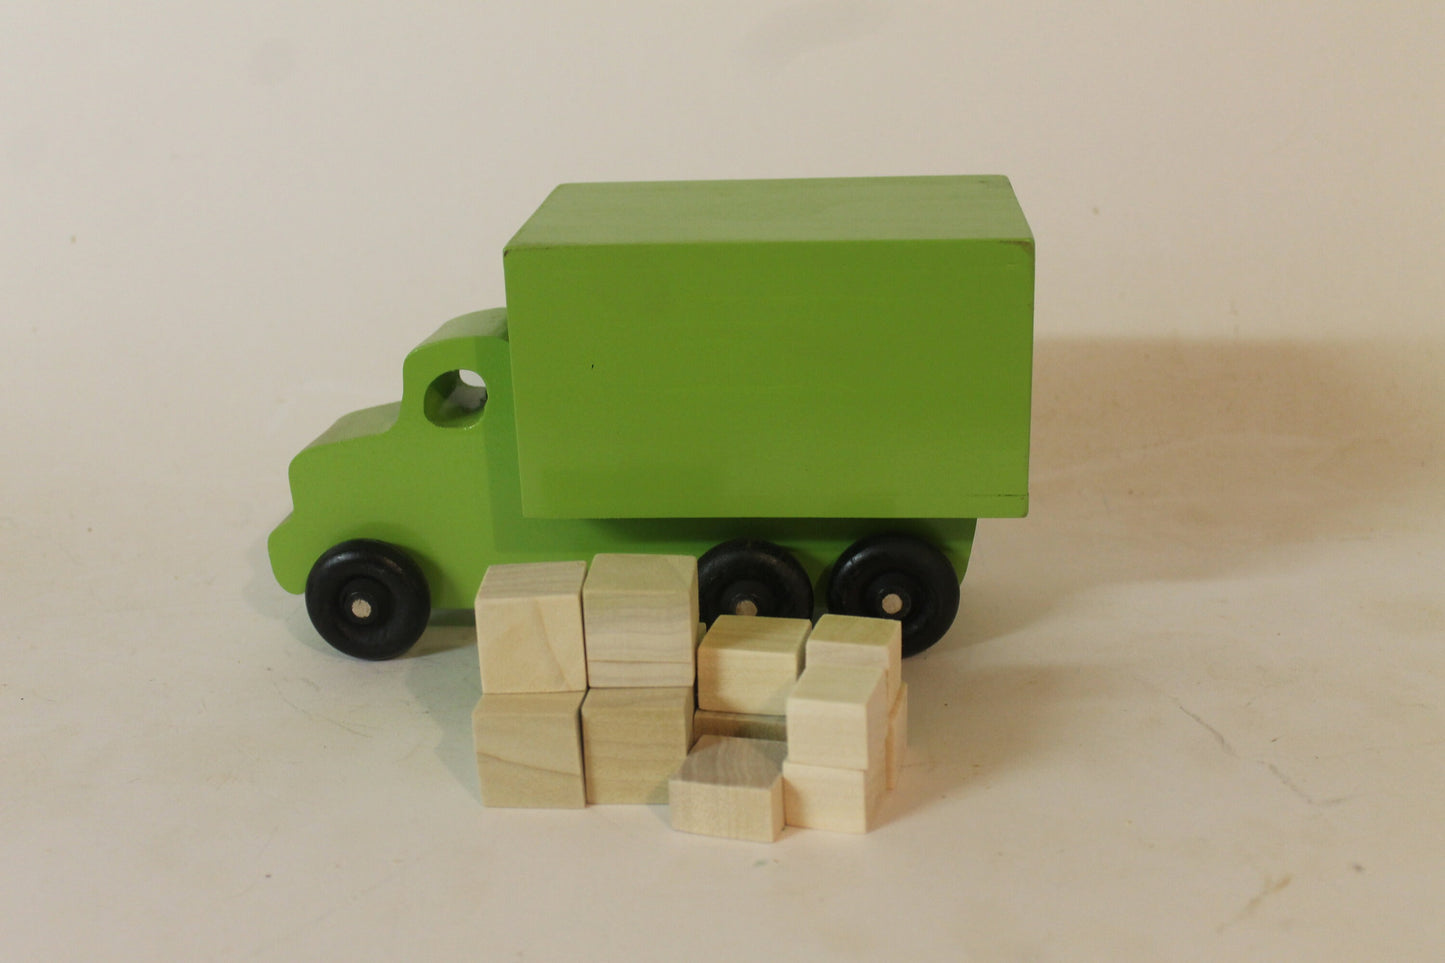 Moving or parcel truck for kids who love to play with toys on wheels. Solid poplar, wooden packages included, choice of color for the truck